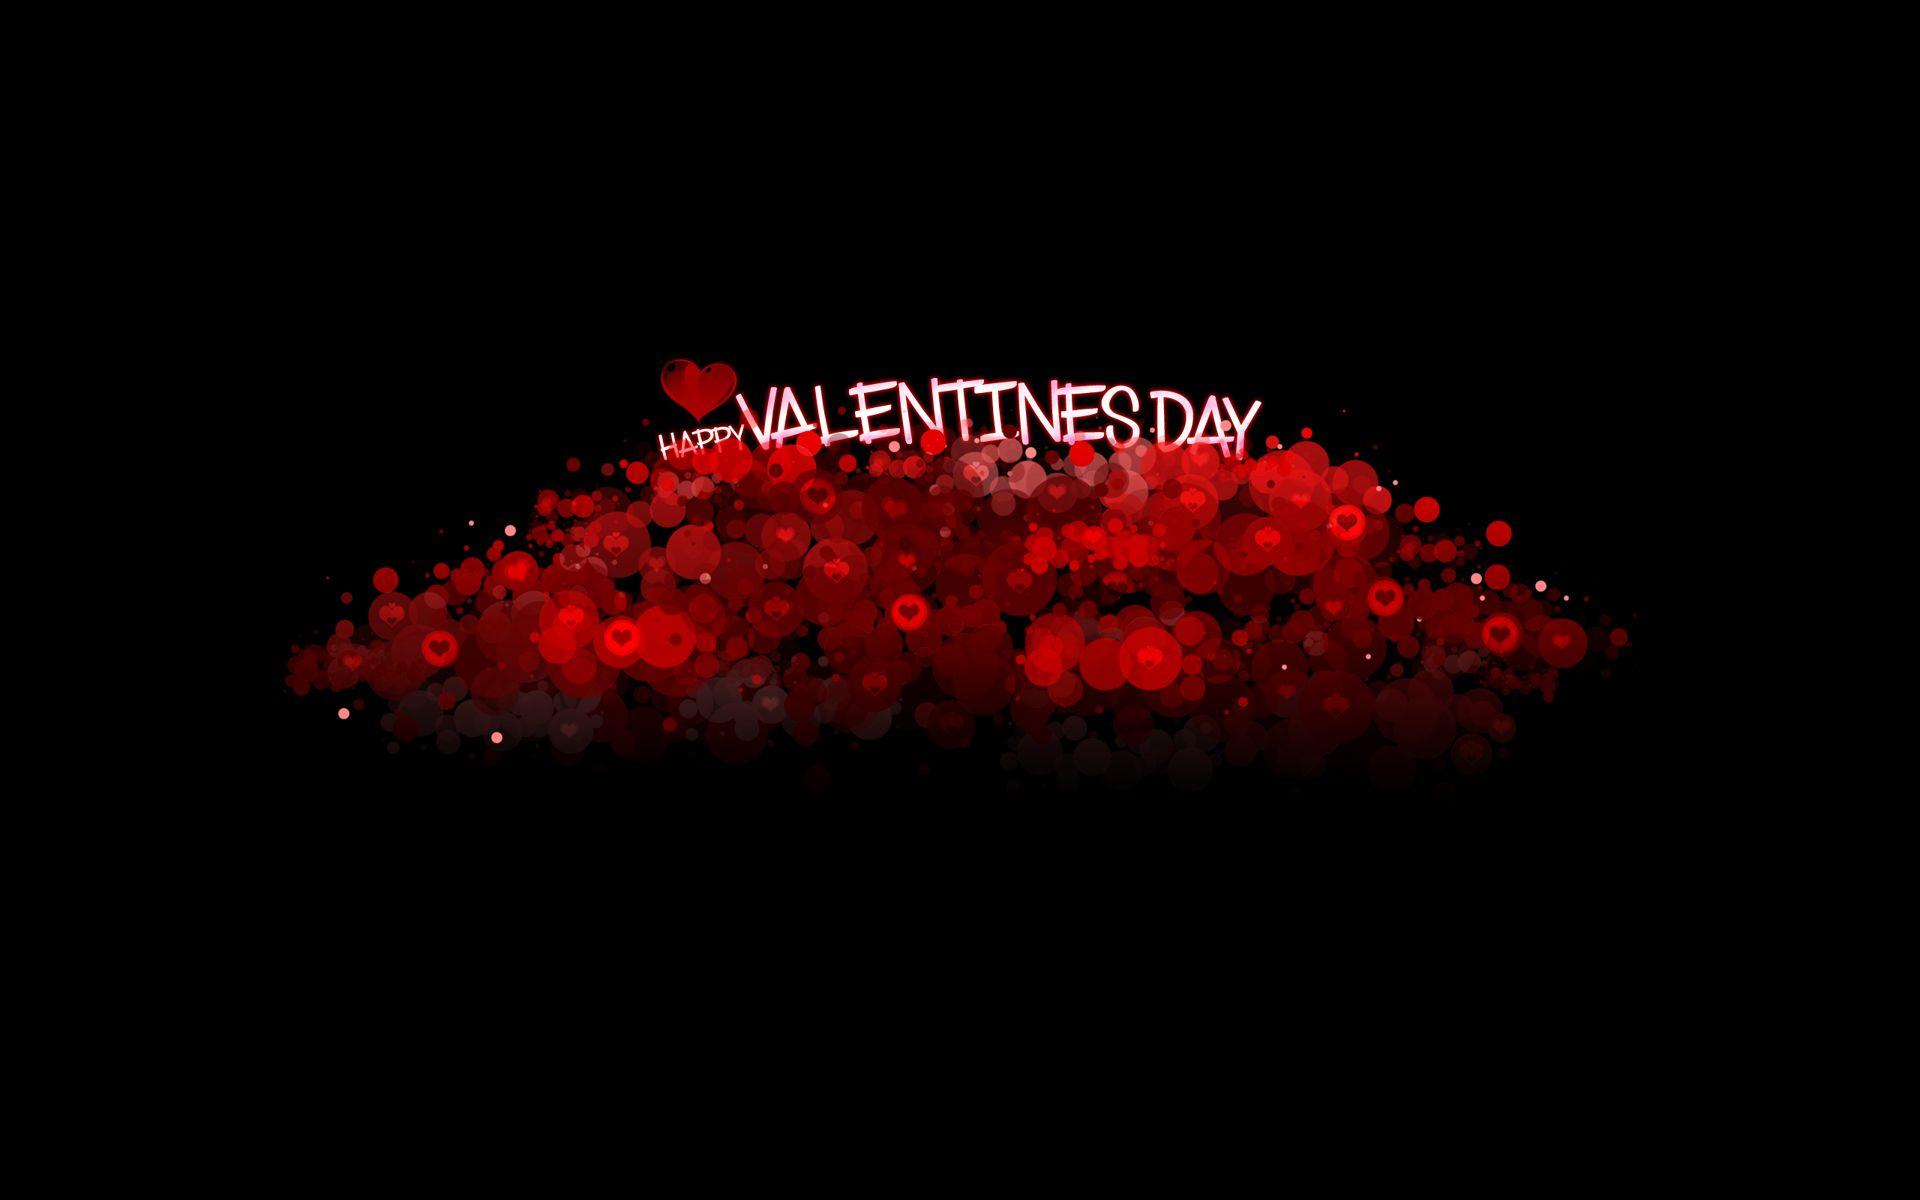 Event Valentine Day Background Wallpaper Wishes Collection